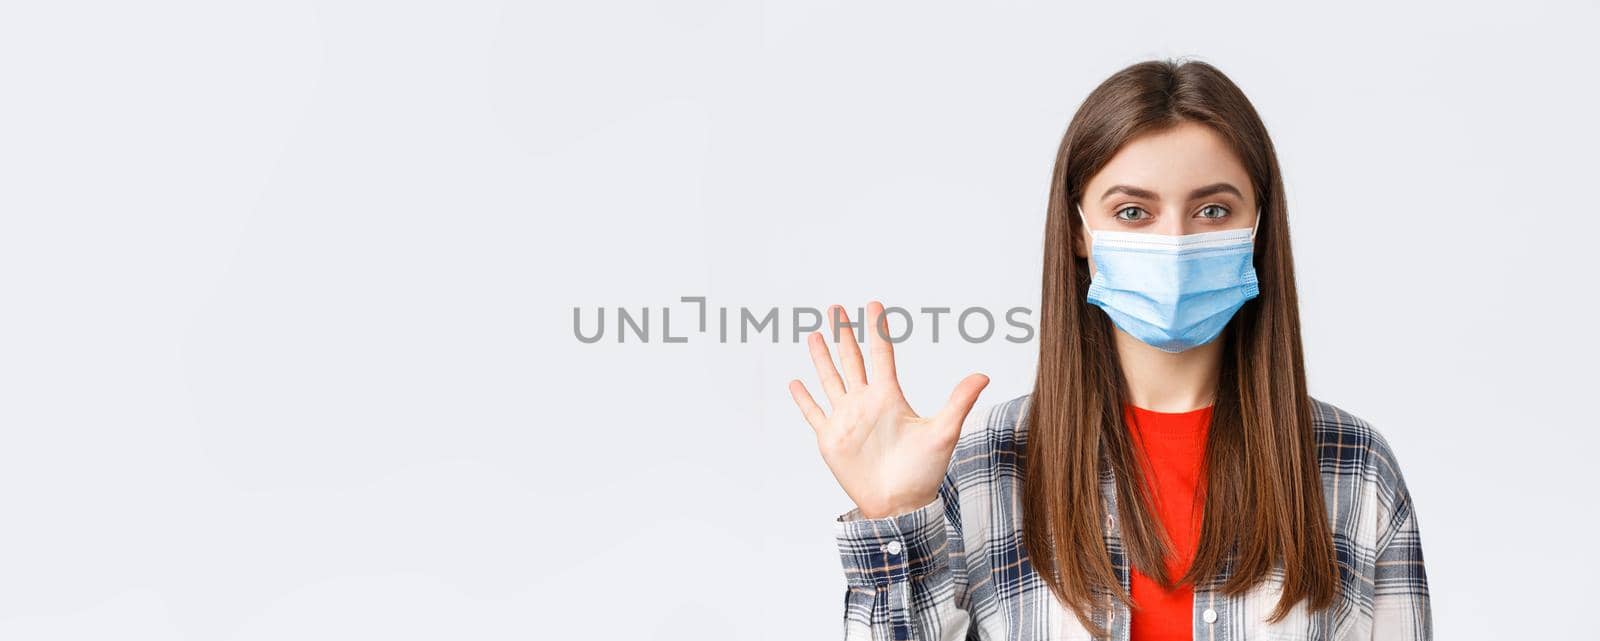 Coronavirus outbreak, leisure on quarantine, social distancing and emotions concept. Attractive female in medical mask and casual clothes show five fingers, number of order, white background.